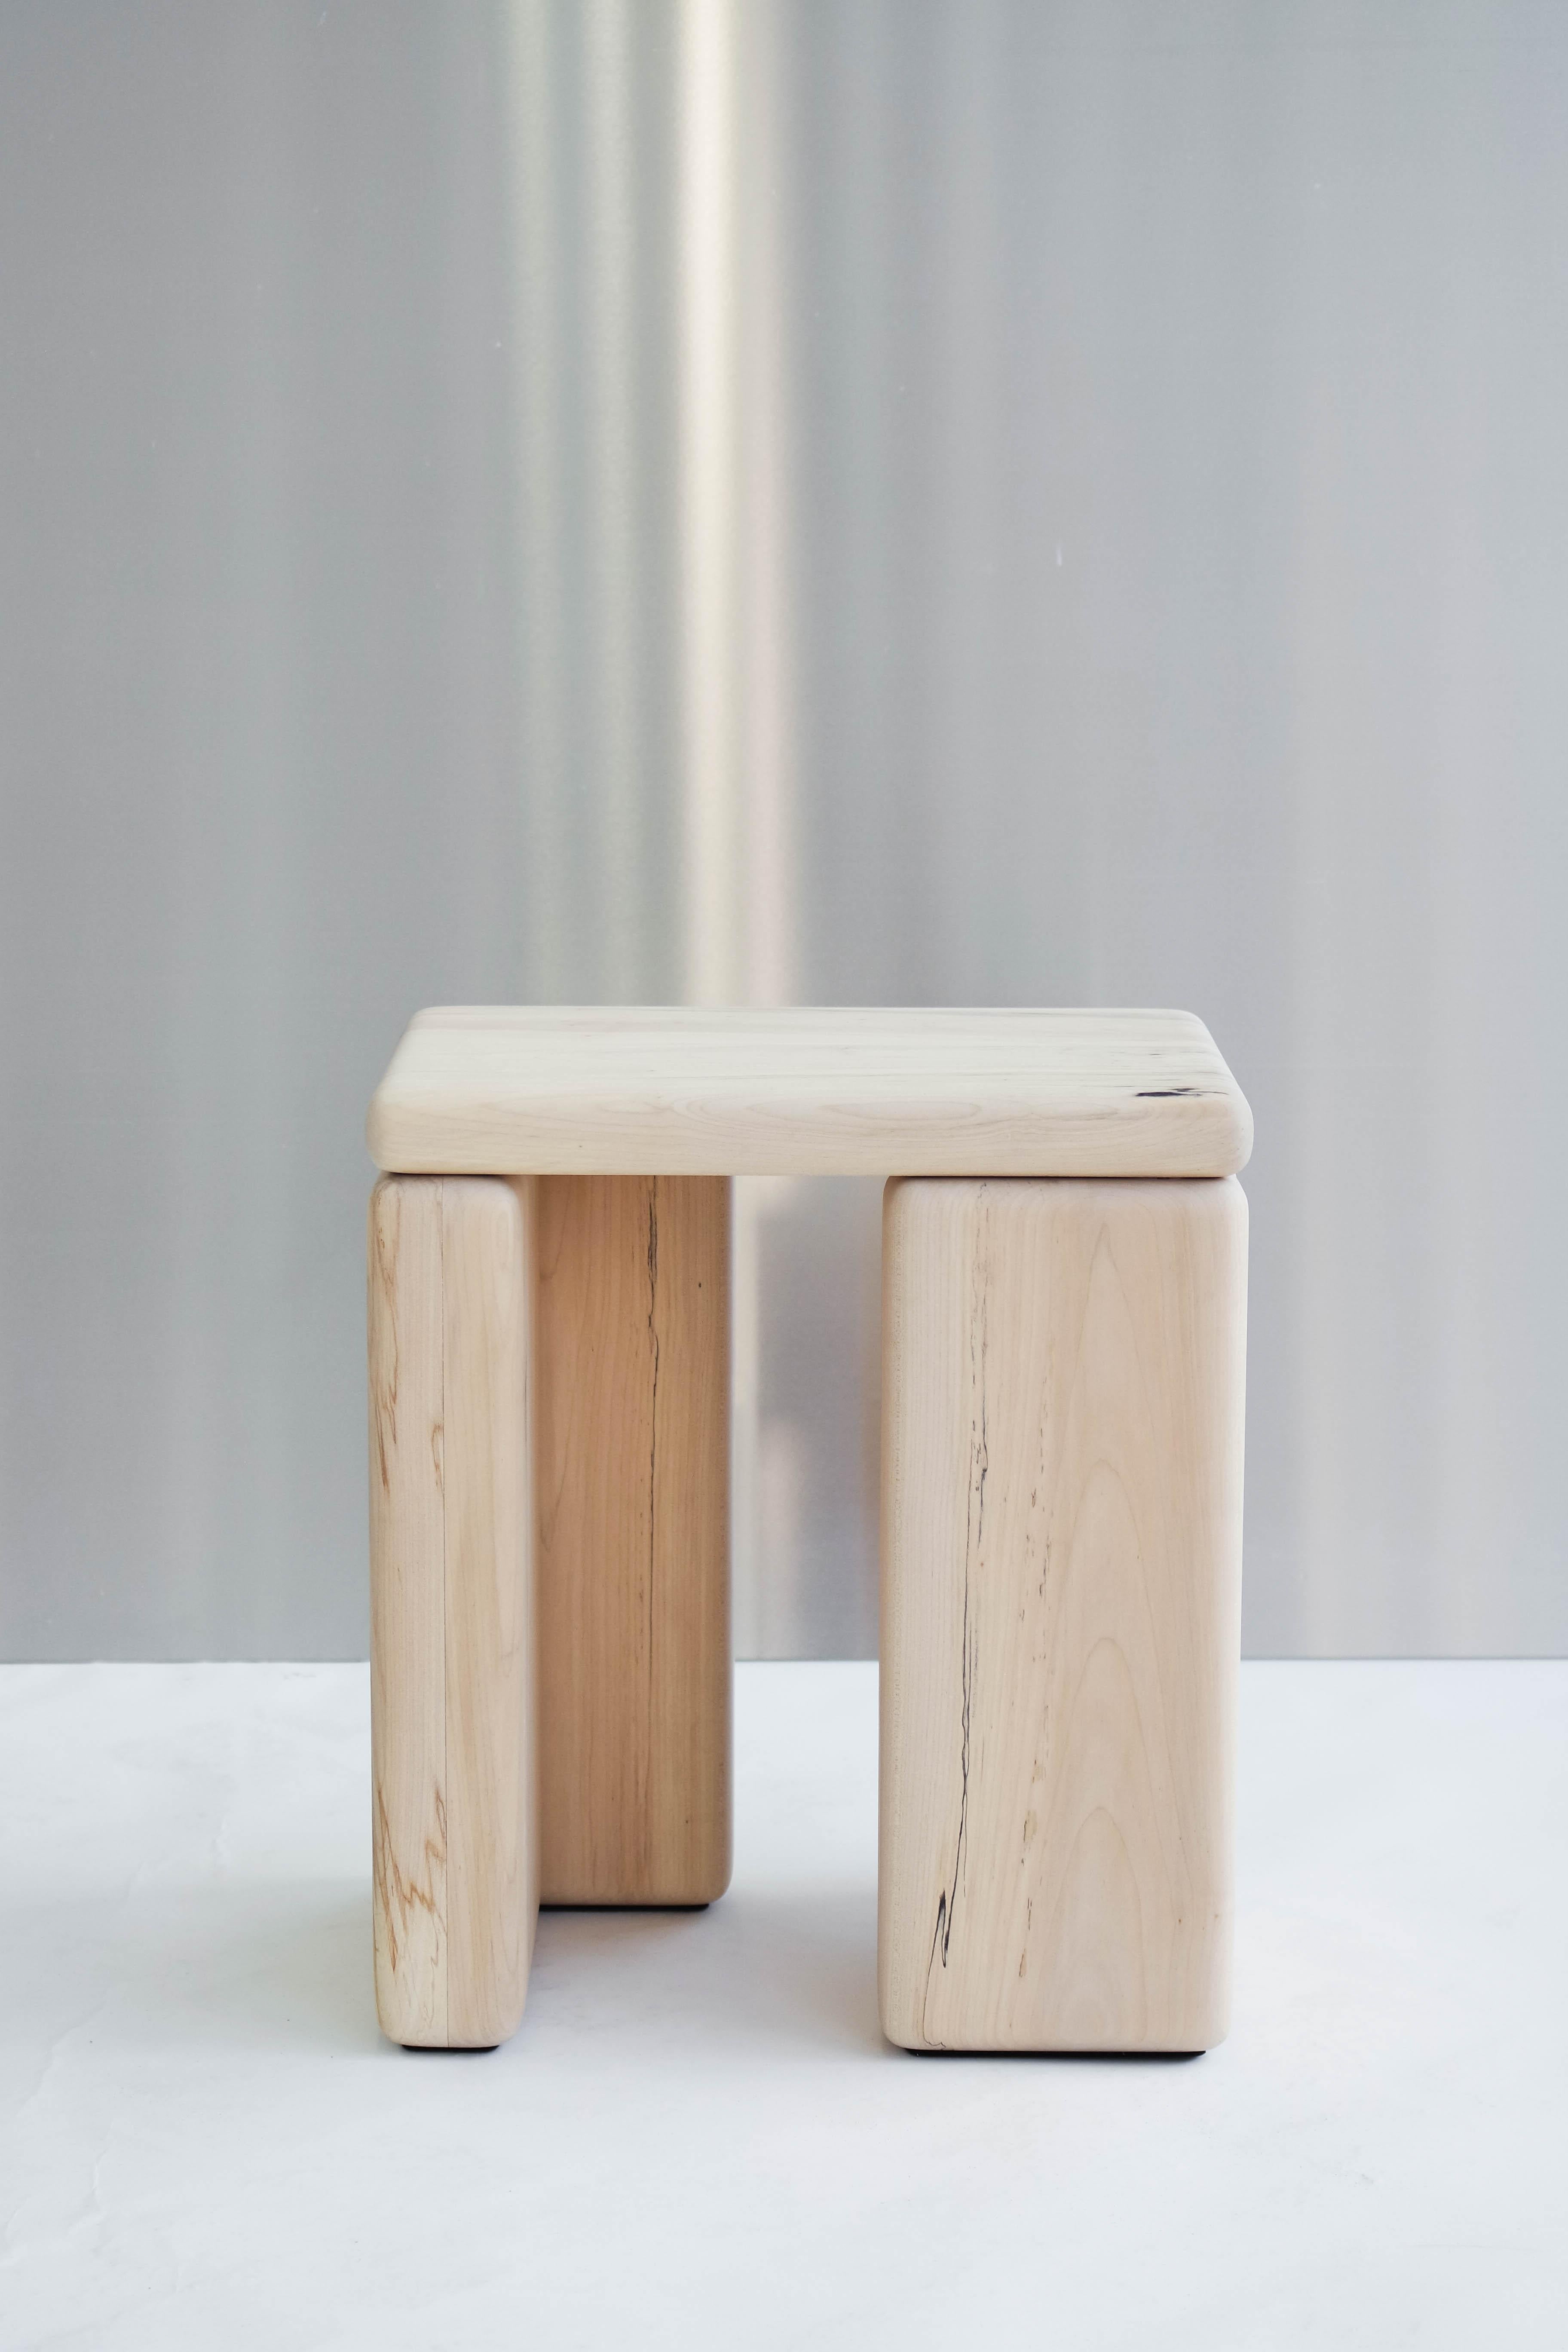 Timber Stool Maple by Onno Adriaanse
Signed and numbered
Dimensions: D 40 x W 29 x H 45 cm
Materials: Maple wood, clear matte coating
Also available in Color: Indigo blue, purple-red, uncolored wood, Maple, Burned Pine. More colors on request. 

By